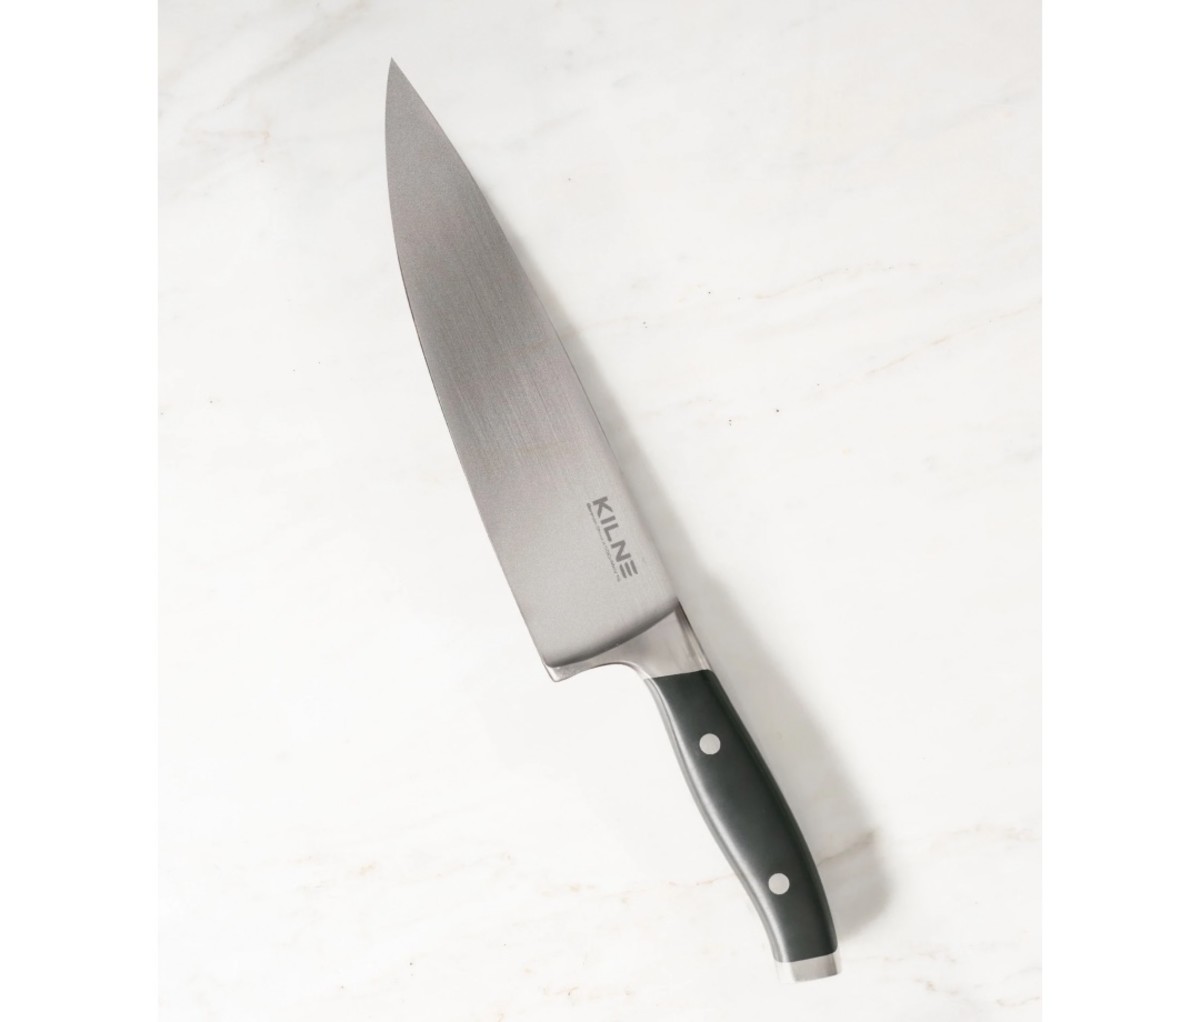 Treat yourself to some new kitchen knives to bring in the new year on a sharp note.